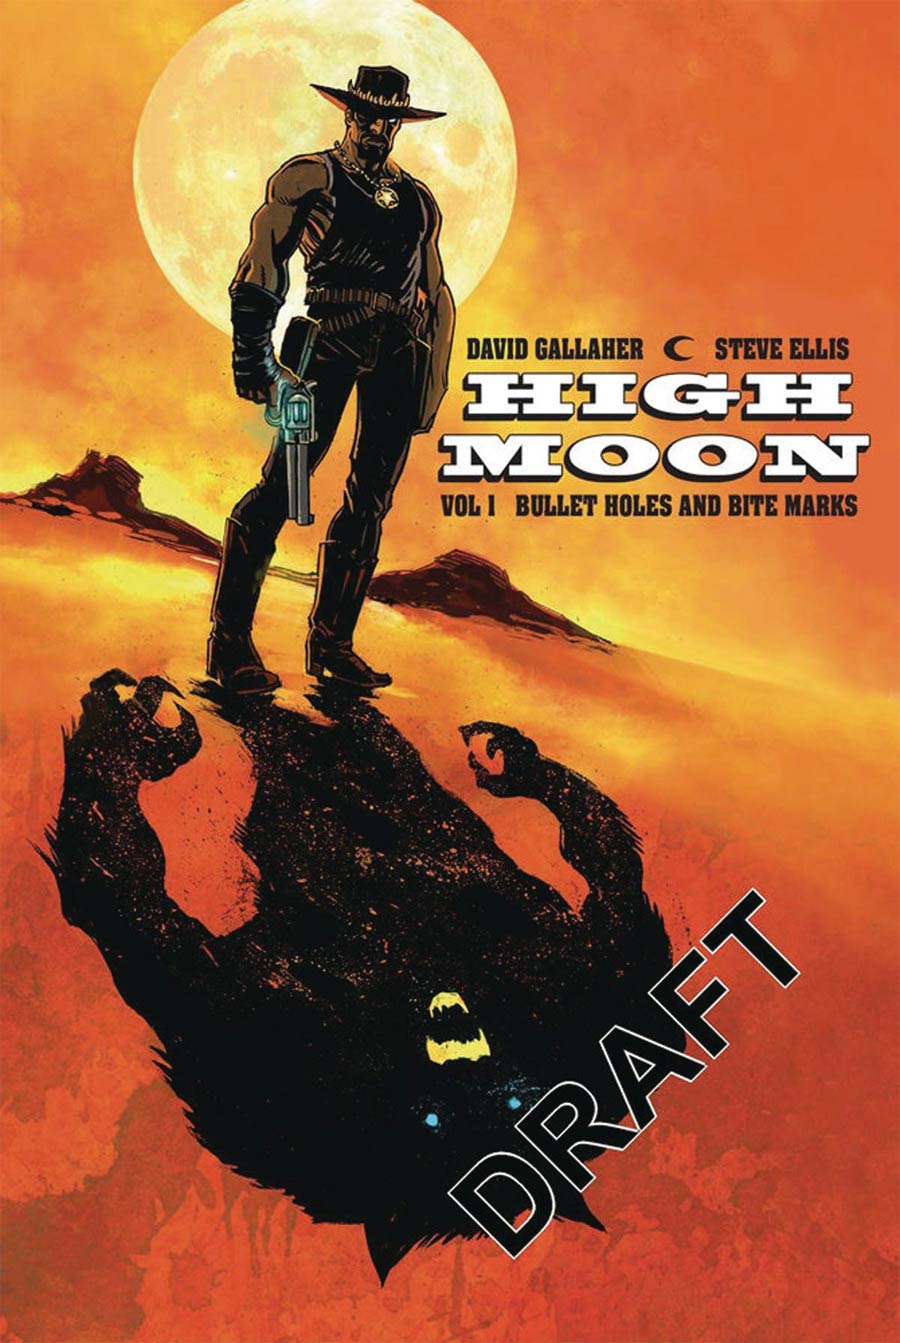 High Moon Vol 1 Bullet Holes And Bite Marks TP